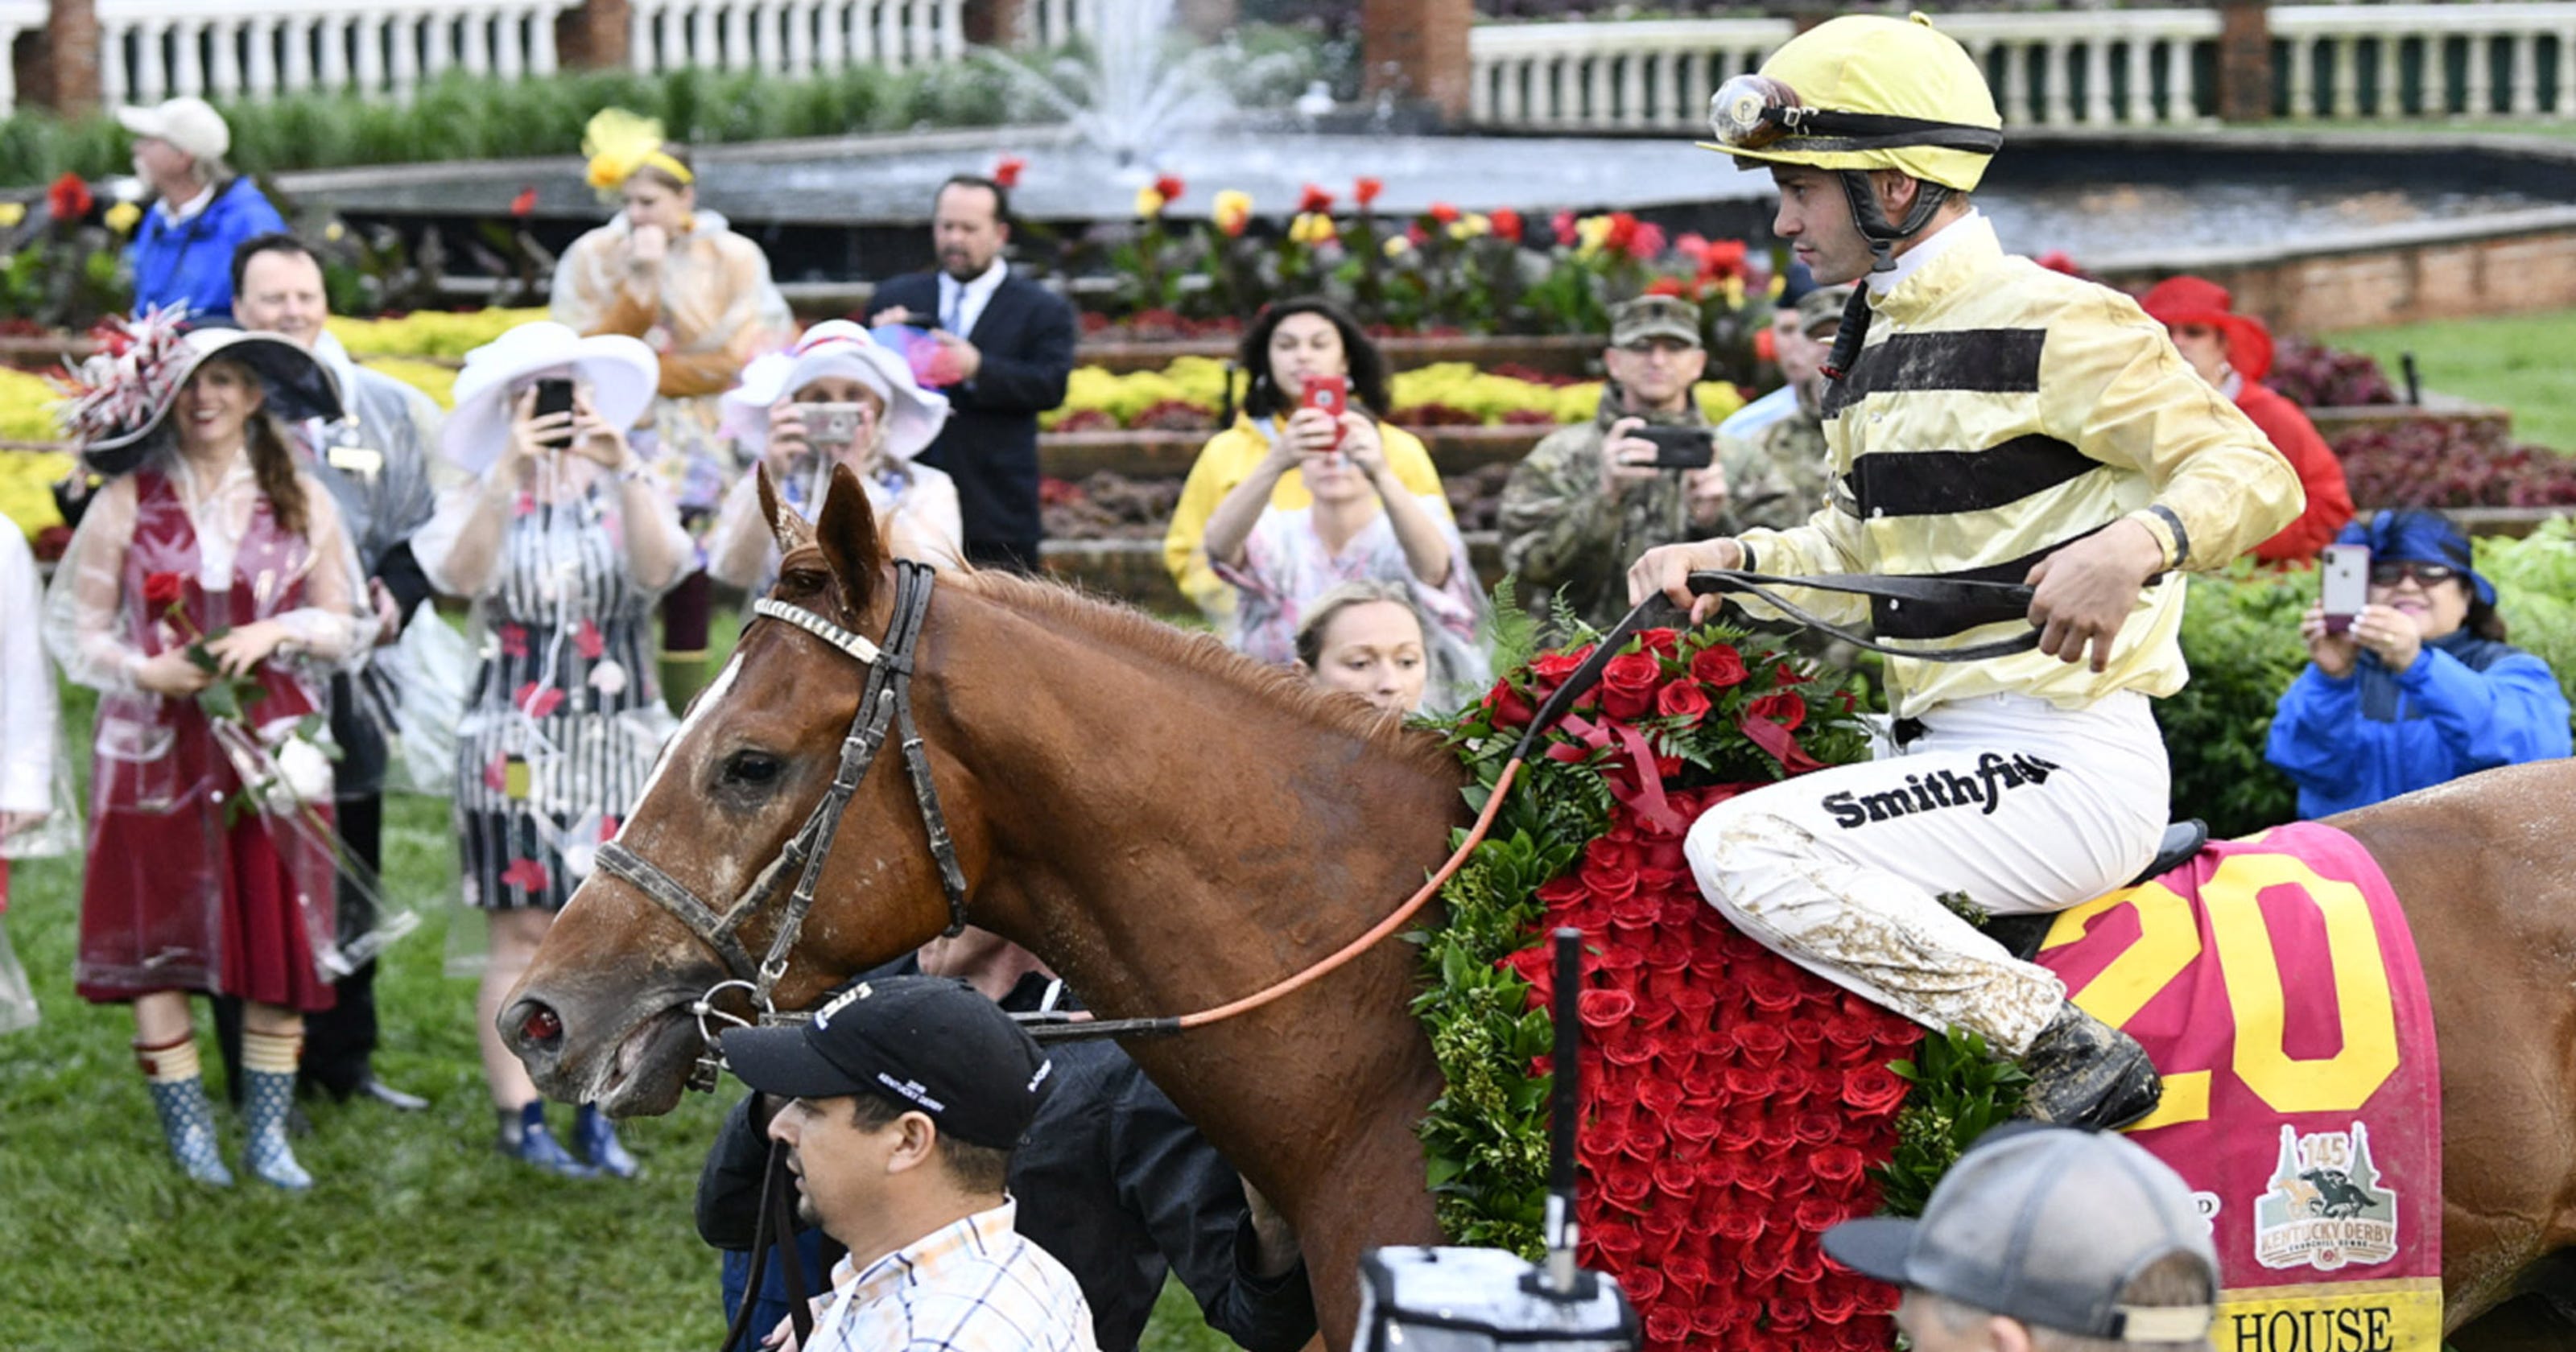 Kentucky Derby Country House win among the race's biggest upsets